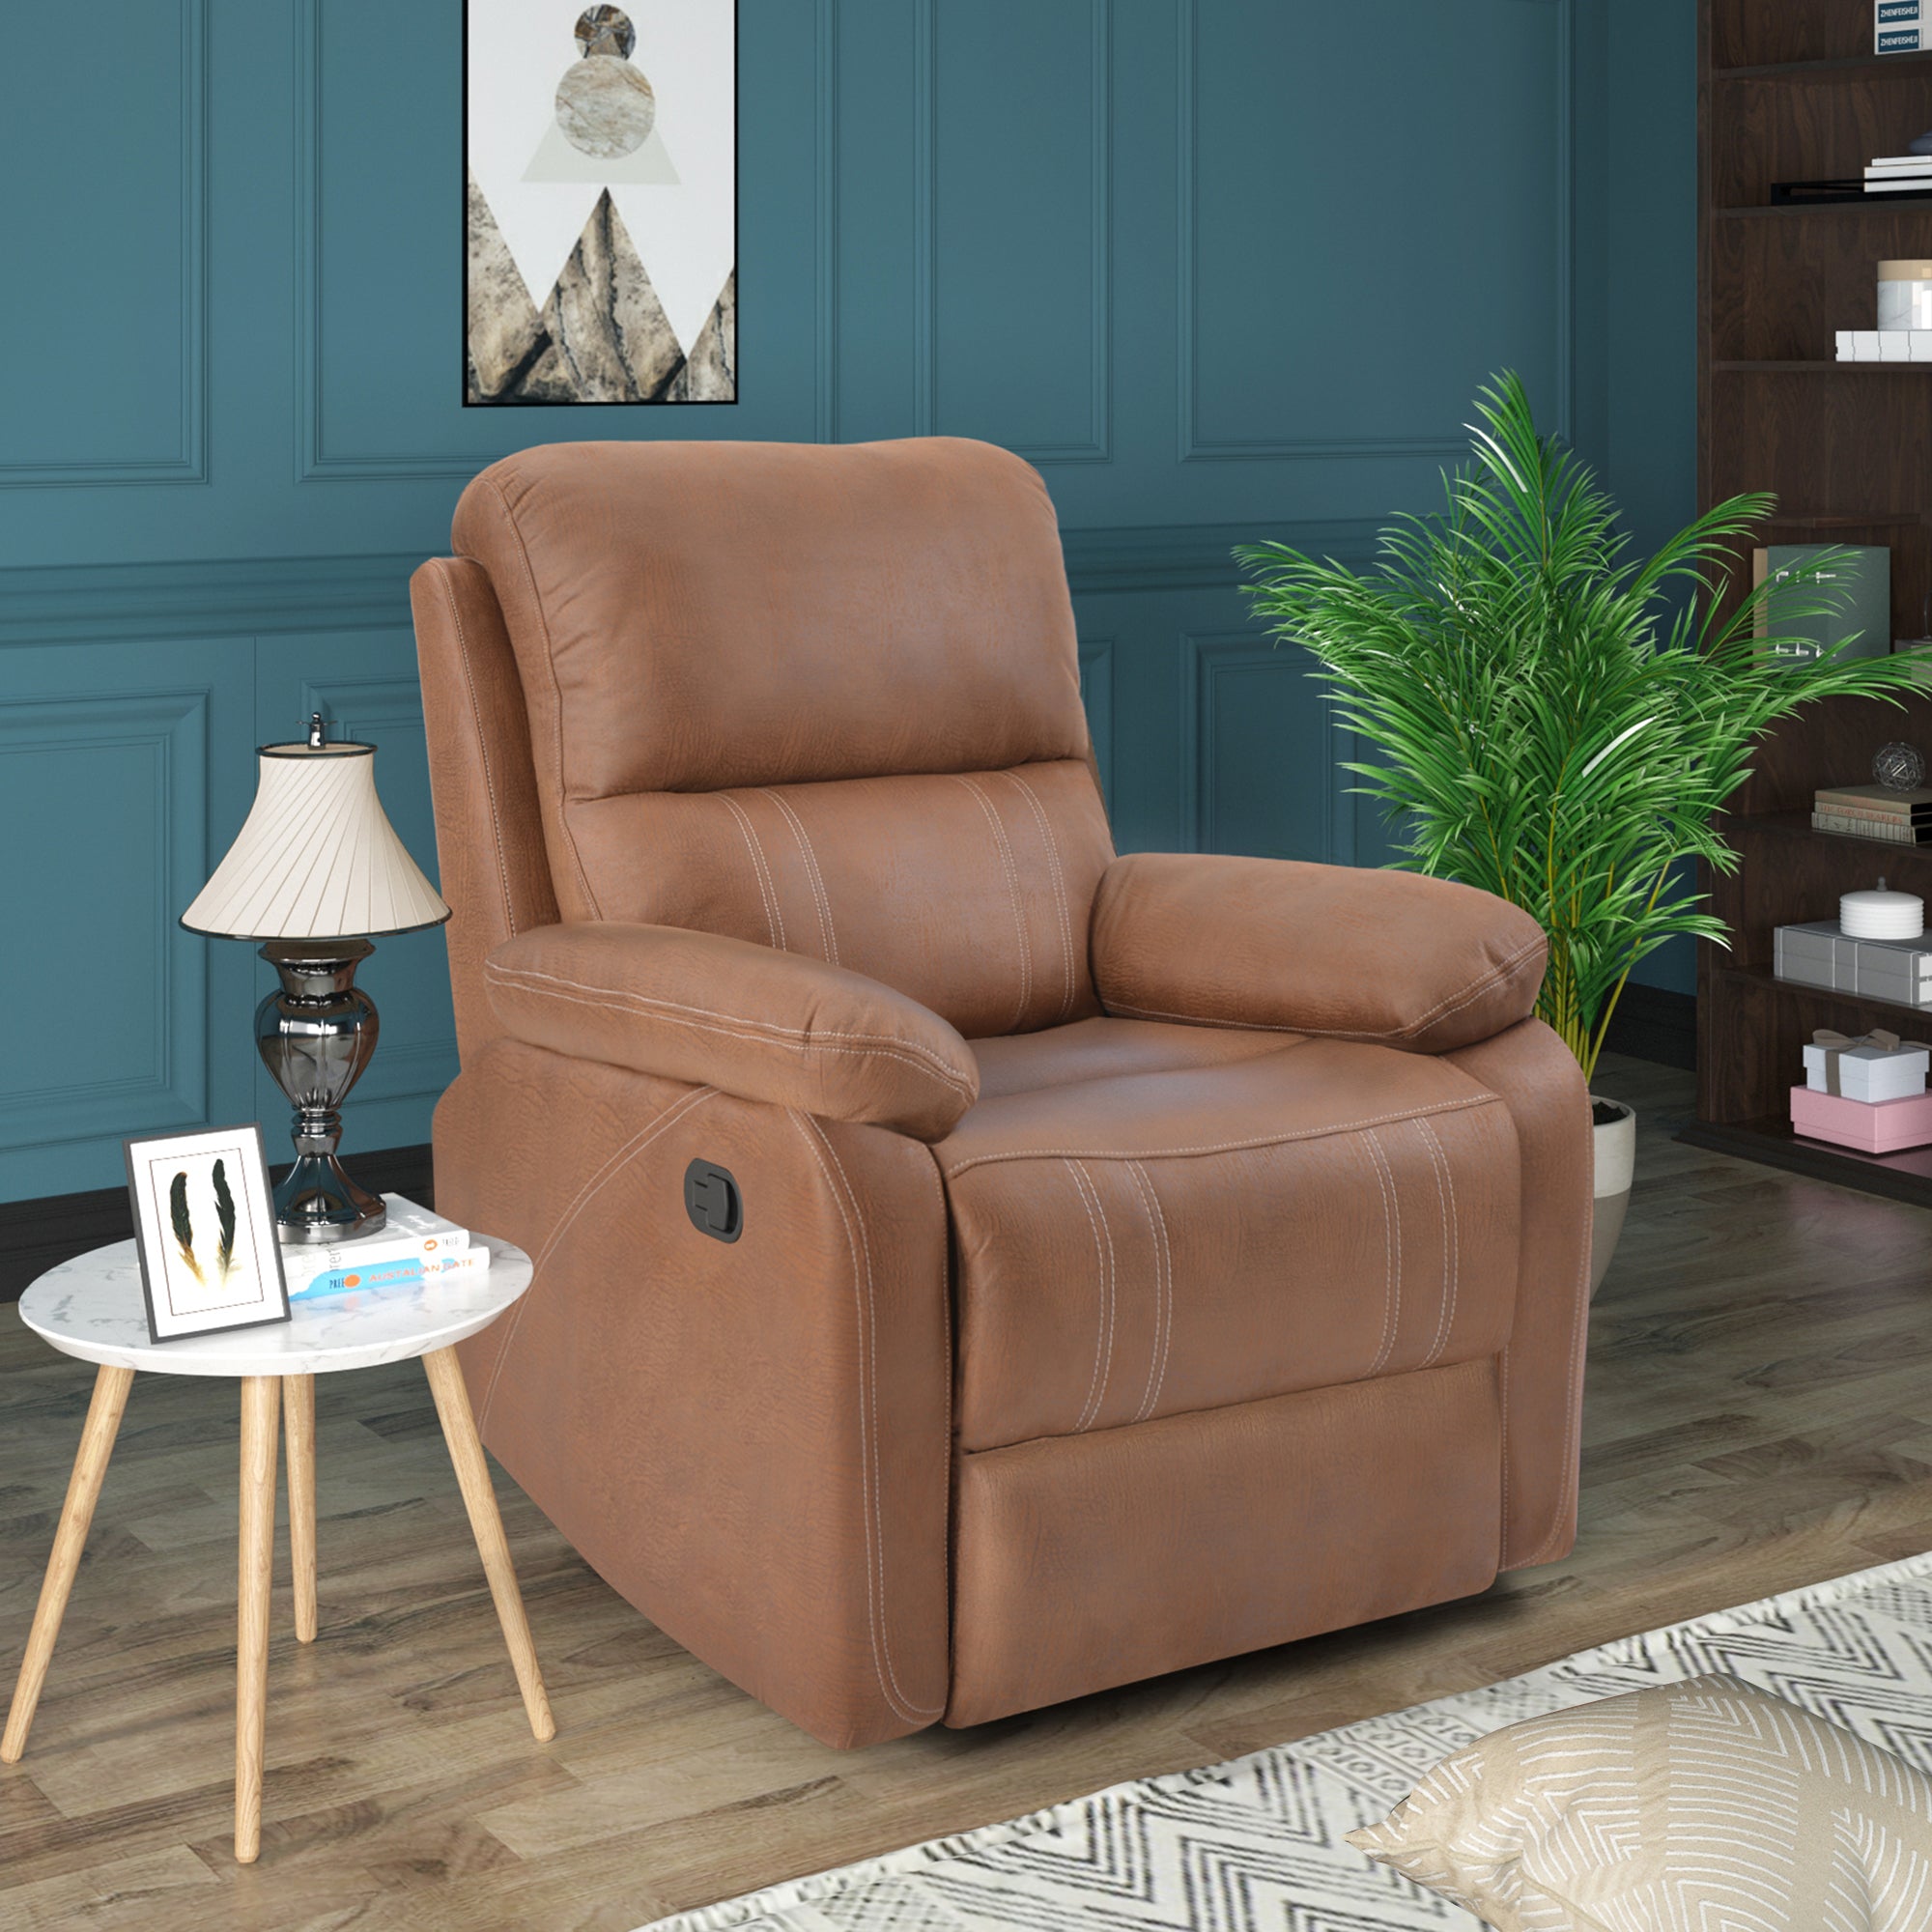 Light Brown Recliner Chair with Padded Seat